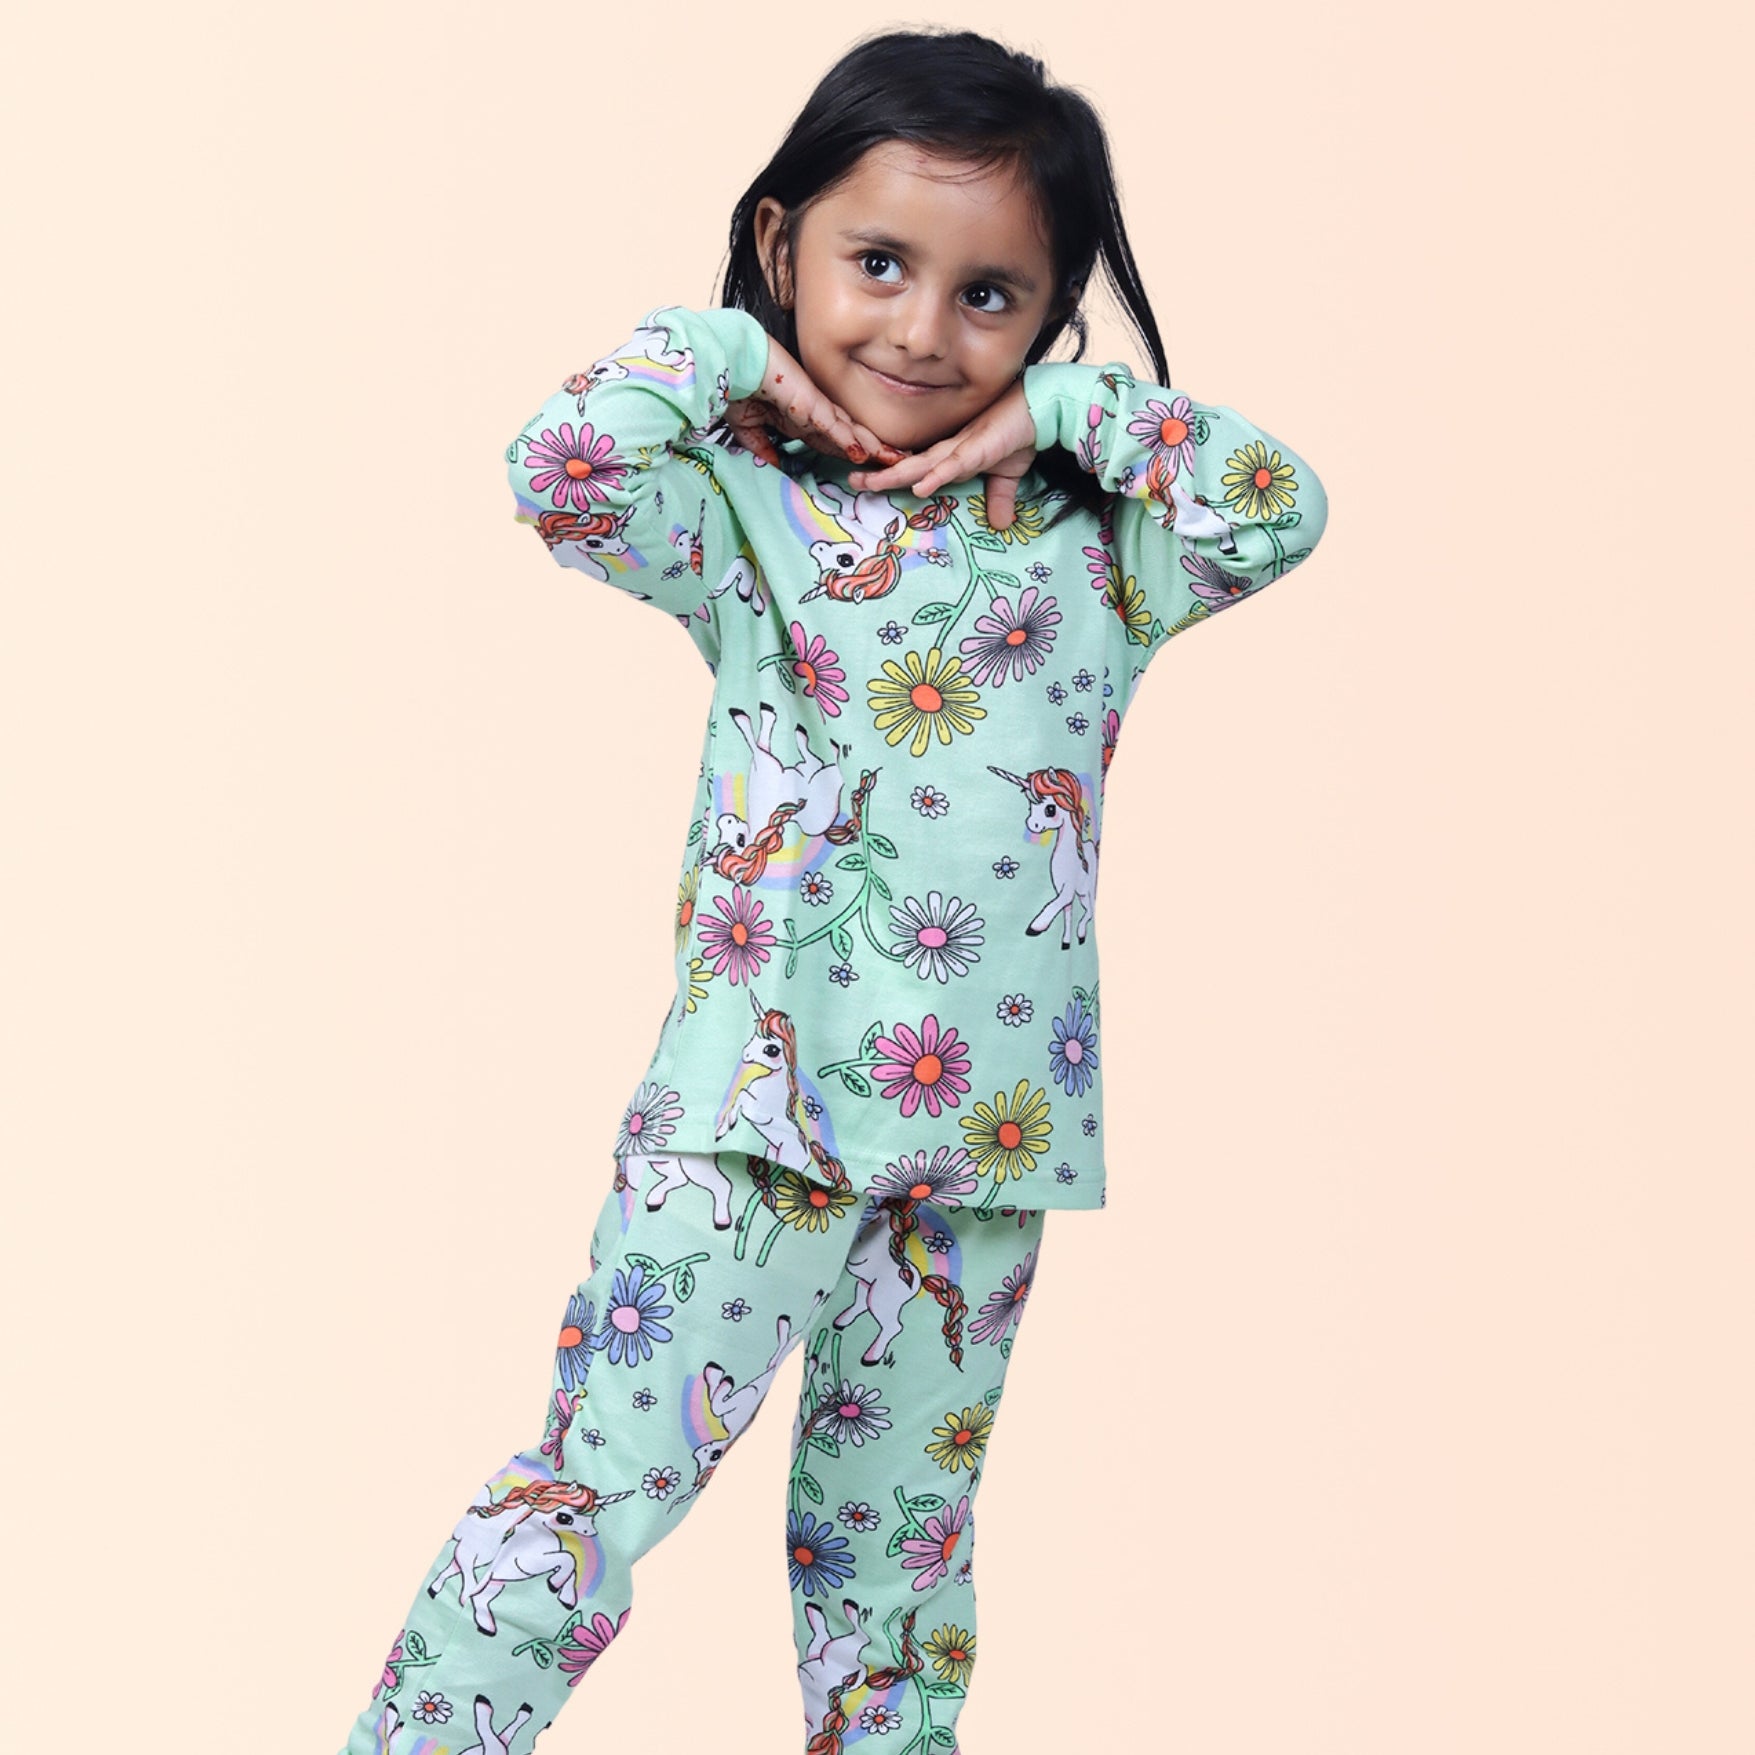 Best Nightwear Styles for Newborns, Infants, and Toddlers